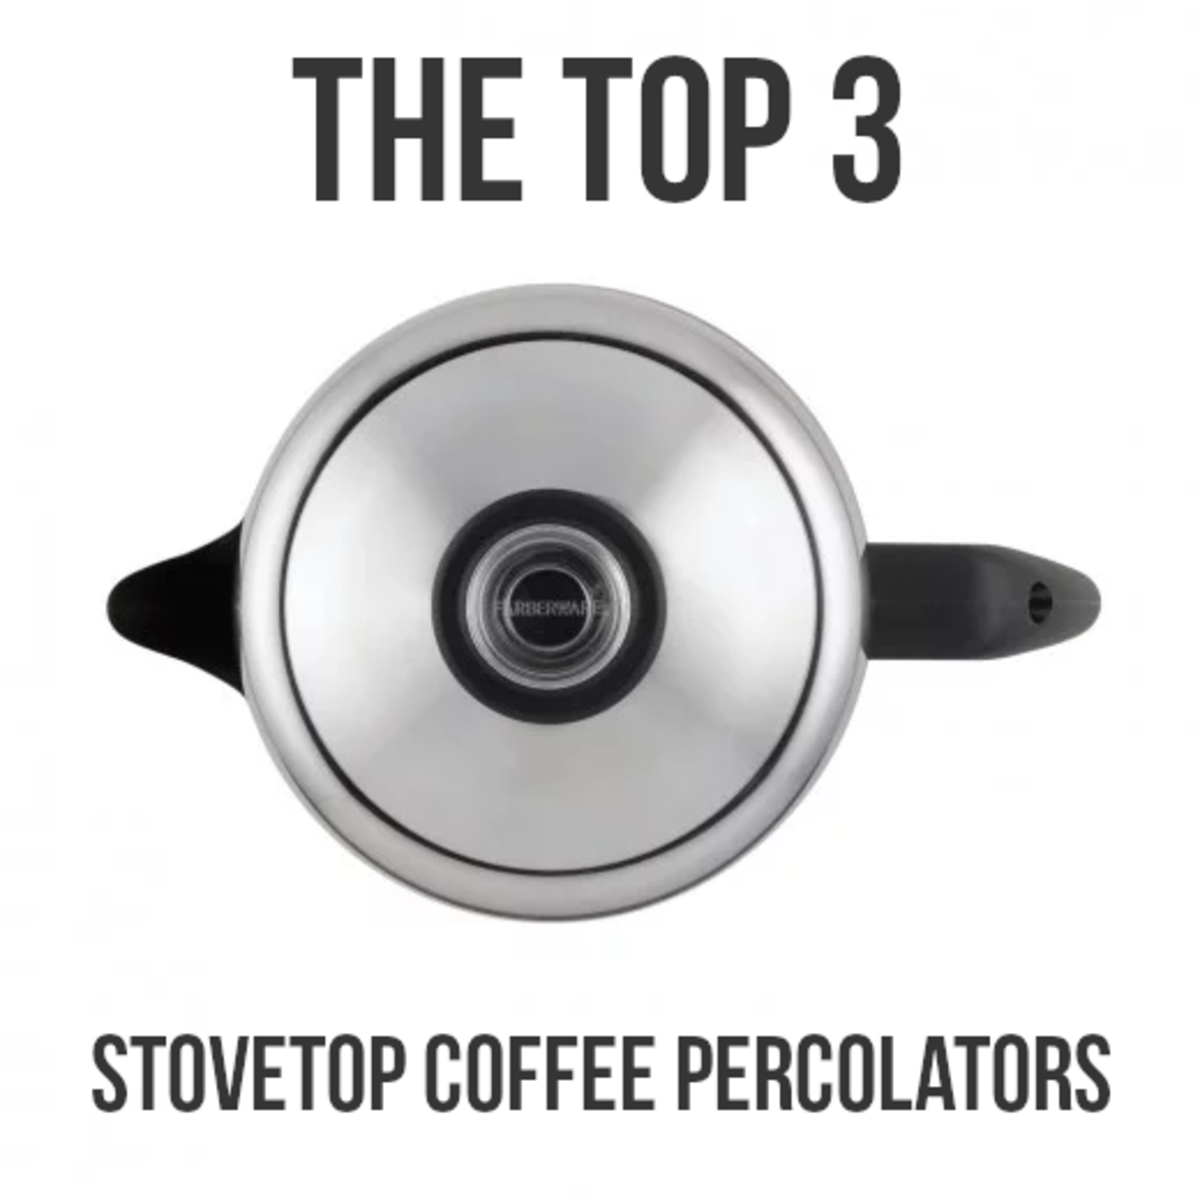 If you are looking for the best stovetop coffee percolator currently available, with regard to value for money, read on...